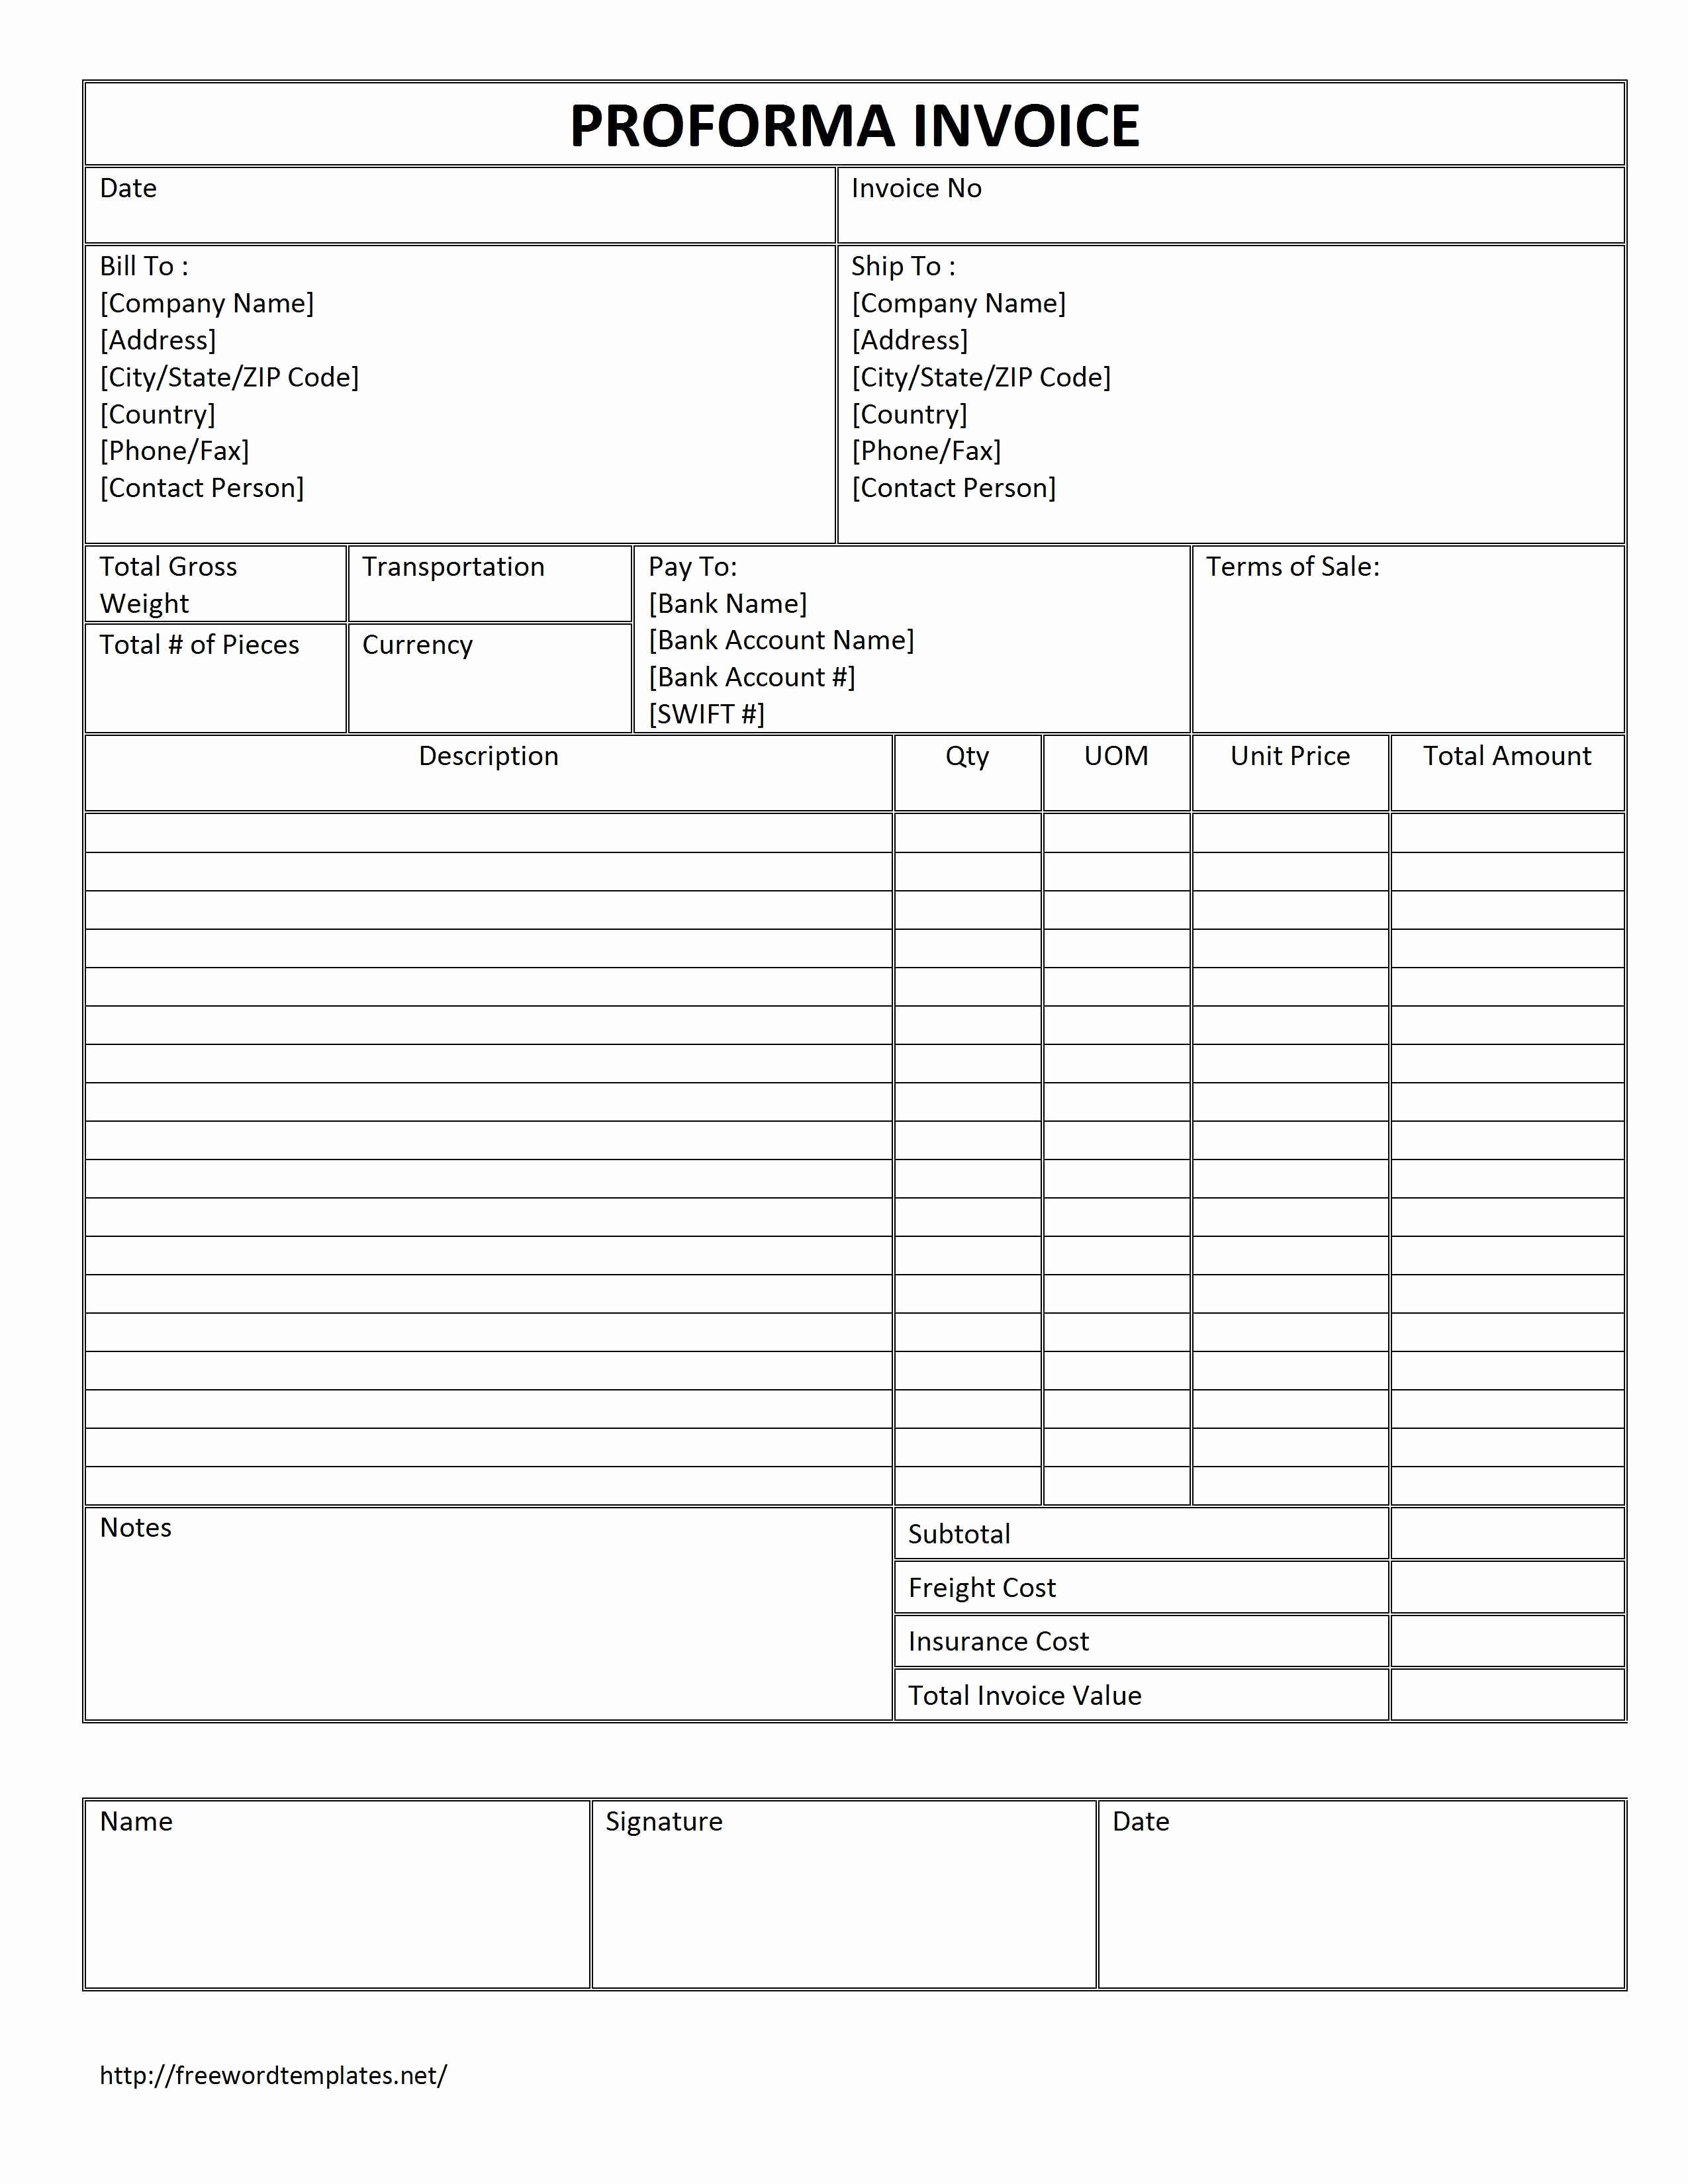 Free Invoice Template for Excel Luxury Proforma Invoice Template Free Download Free Proforma